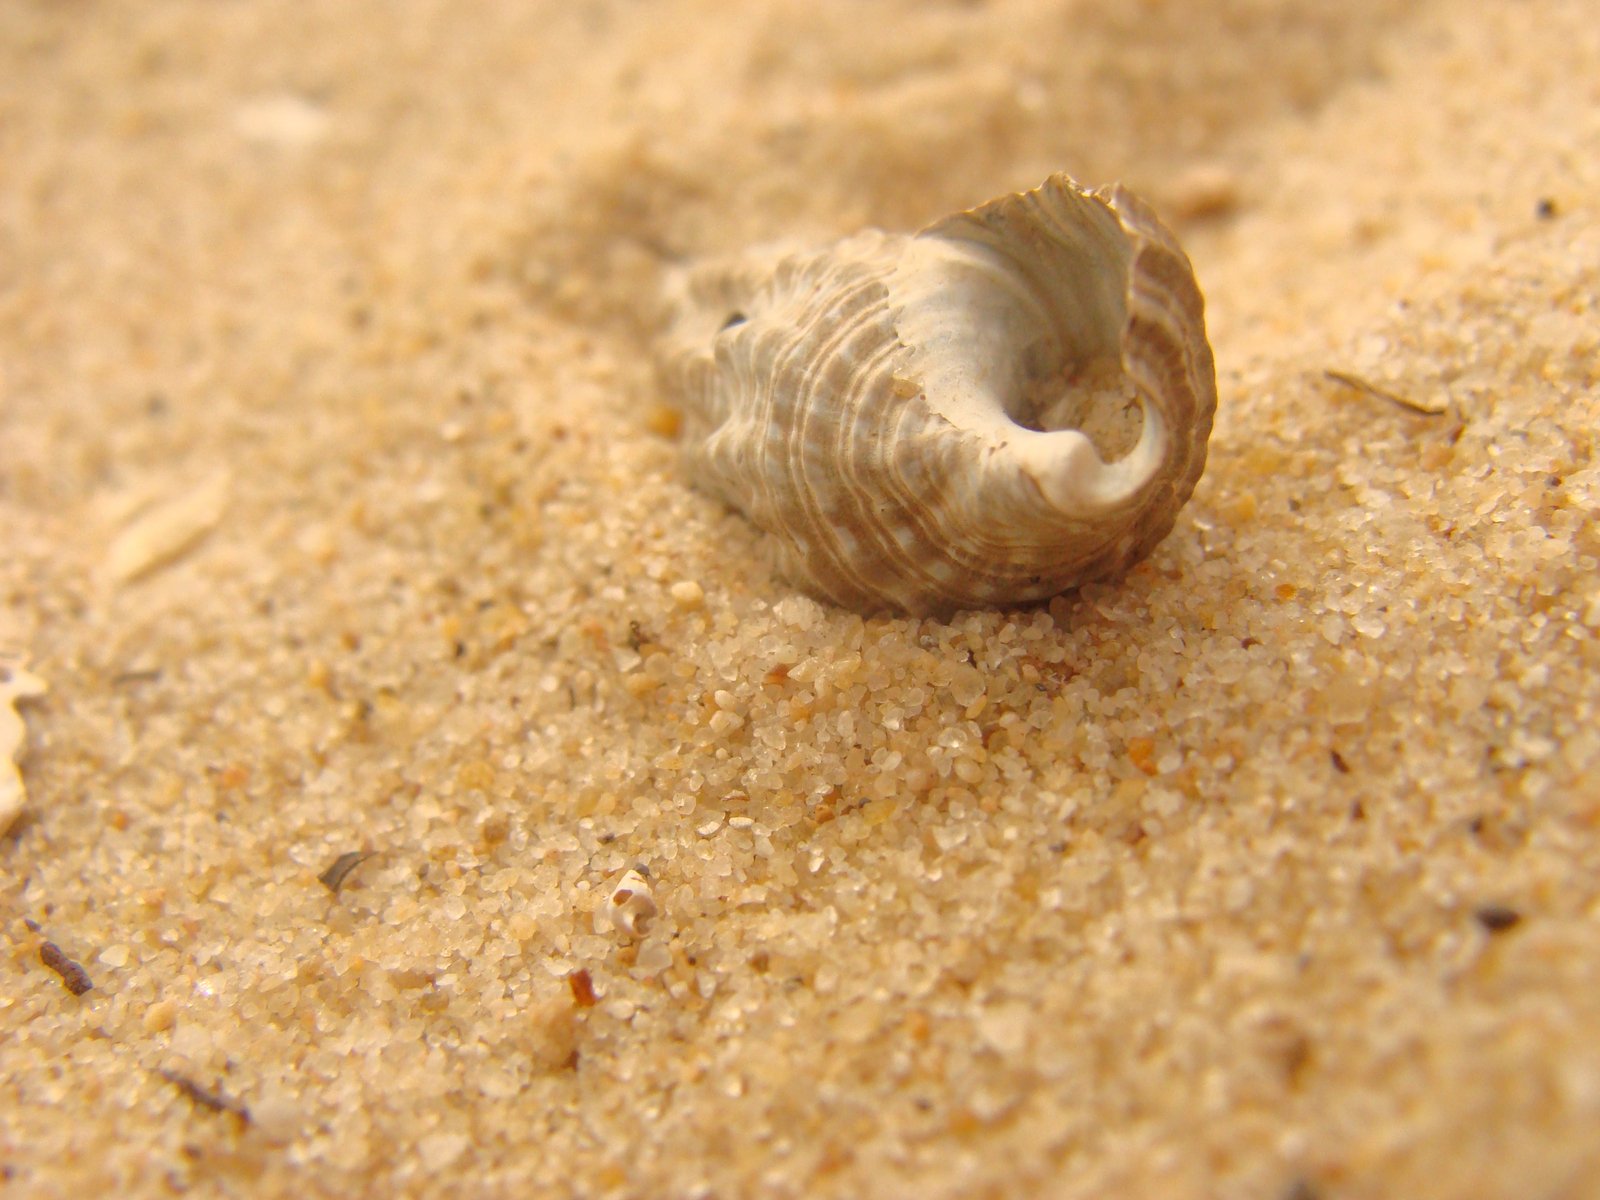 a close up po of a shell on a sandy surface